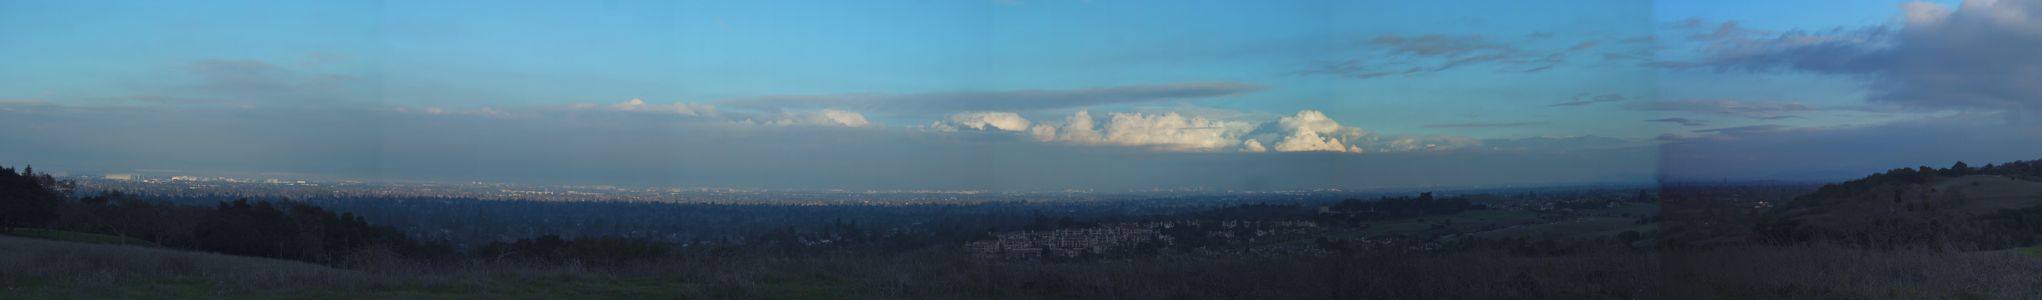 Clouds over Mount Hamilton from Mora Hill - 1/2013